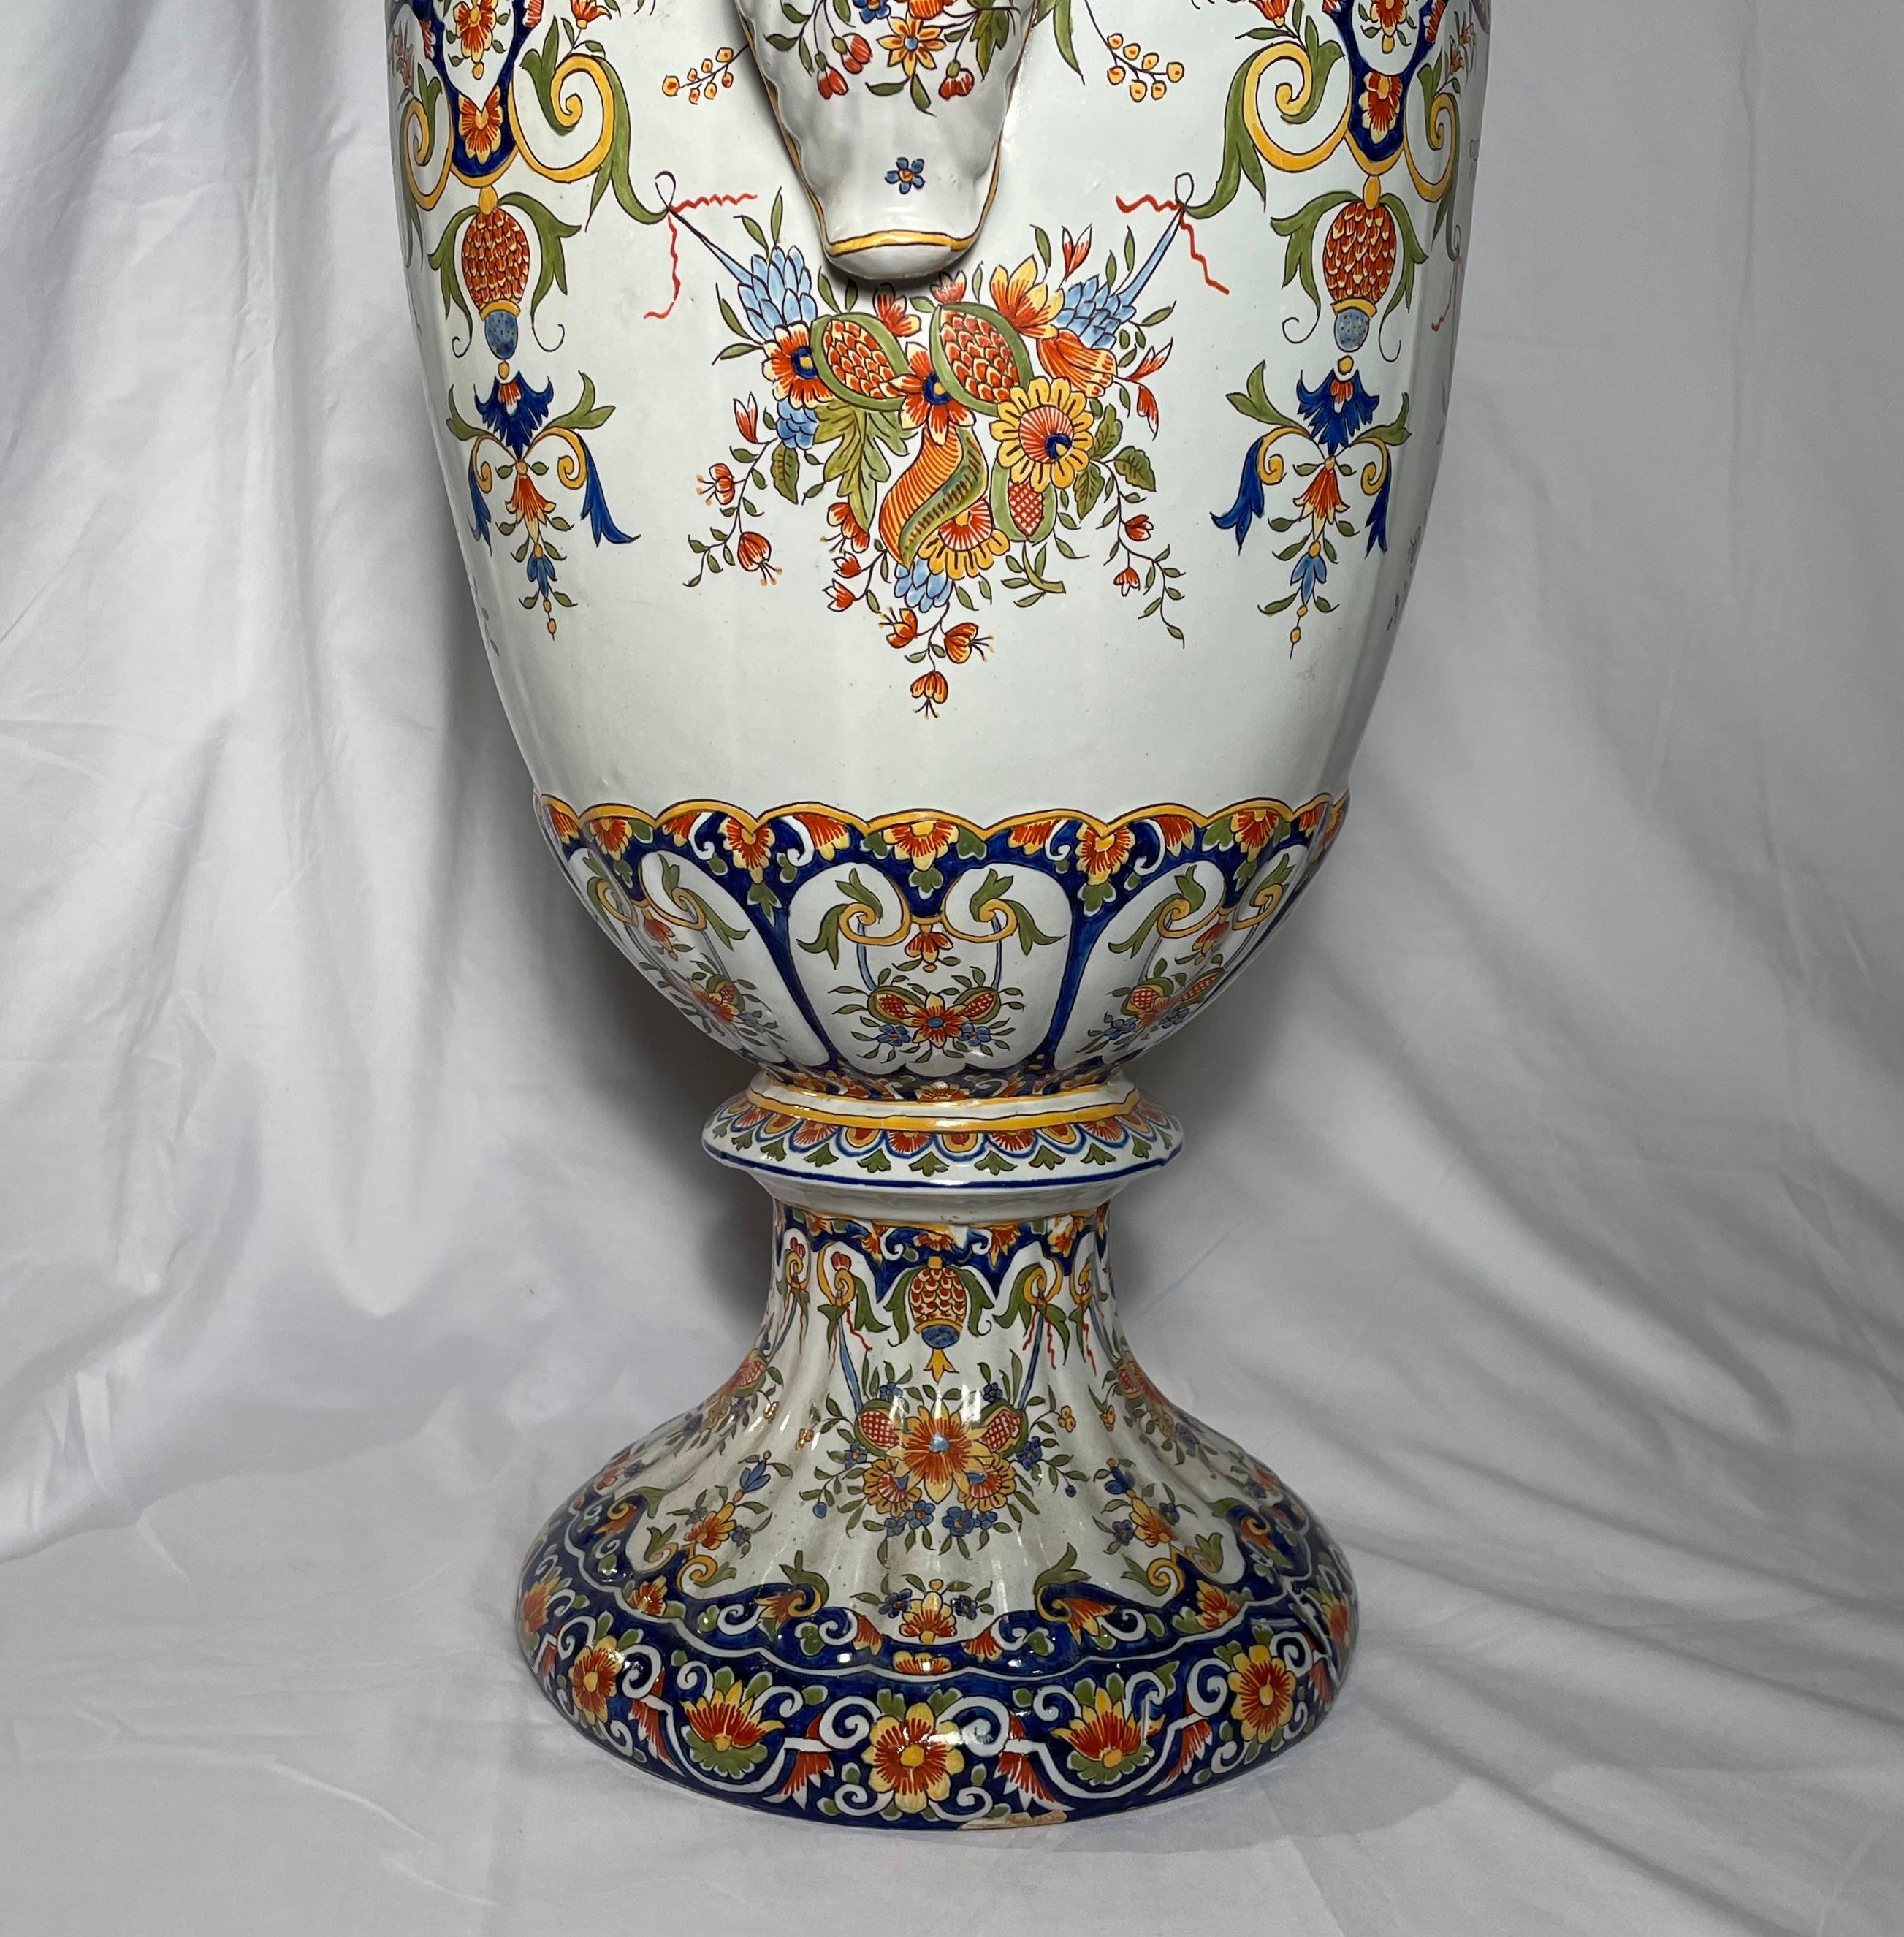 Antique French Faience Enameled Urn, circa 1900-1910 In Good Condition For Sale In New Orleans, LA